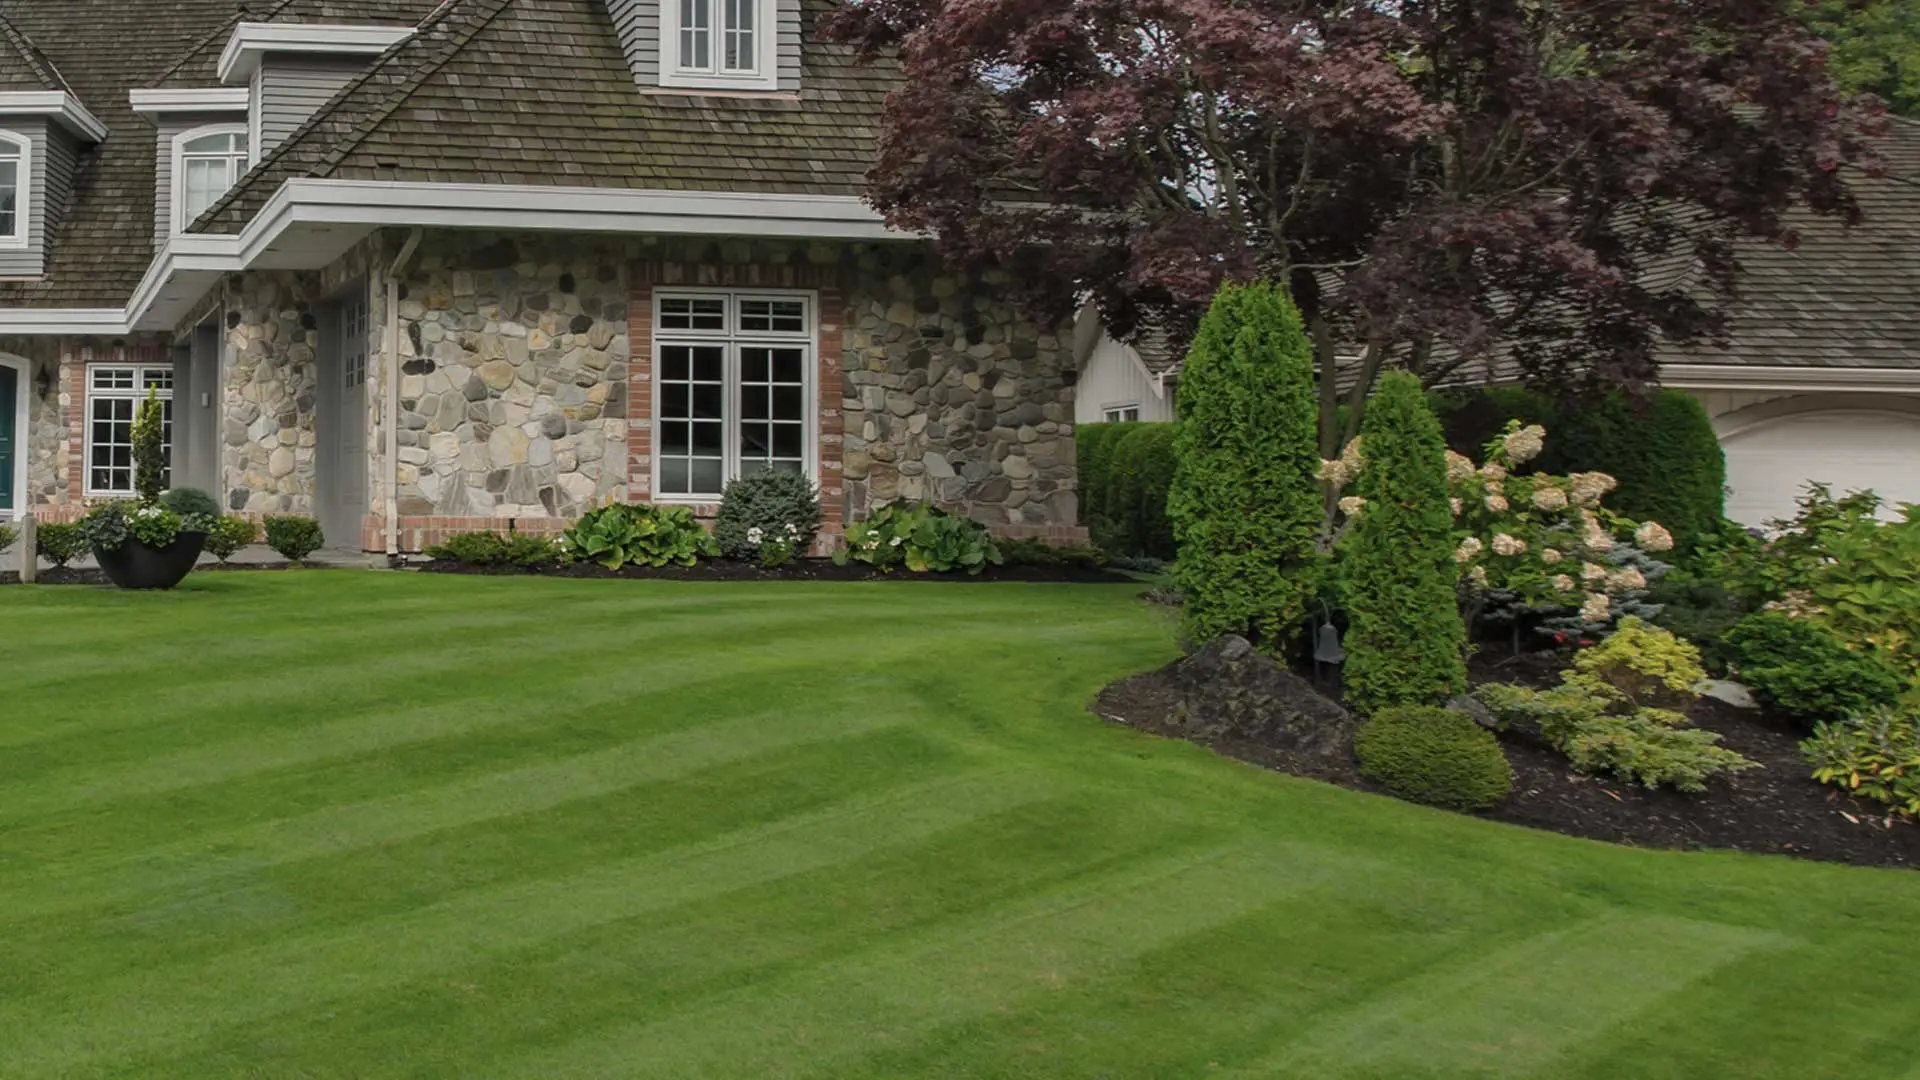 Trimmed landscaping shrubs and hedges in front of a home in Rhinecliff, NY.